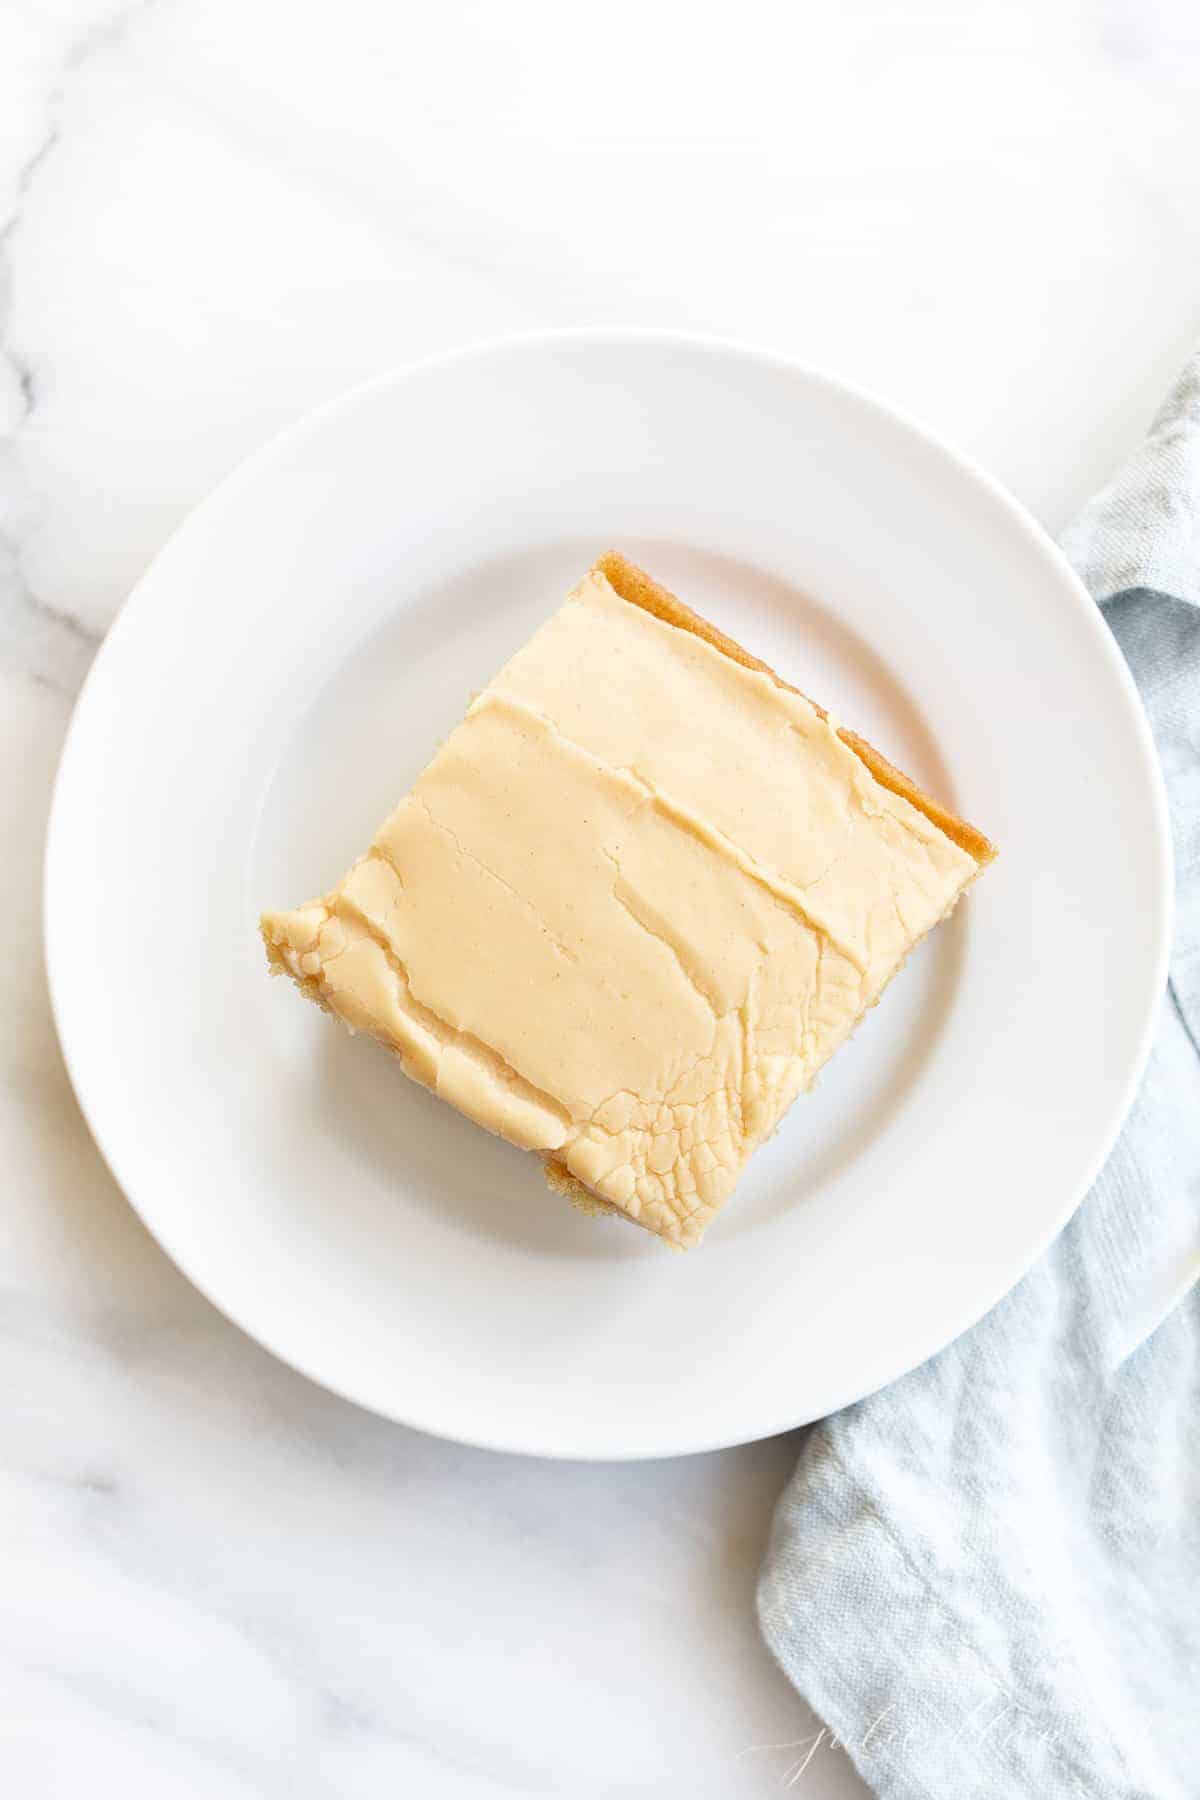 peanut butter cake with peanut butter icing on a plate with a blue napkin